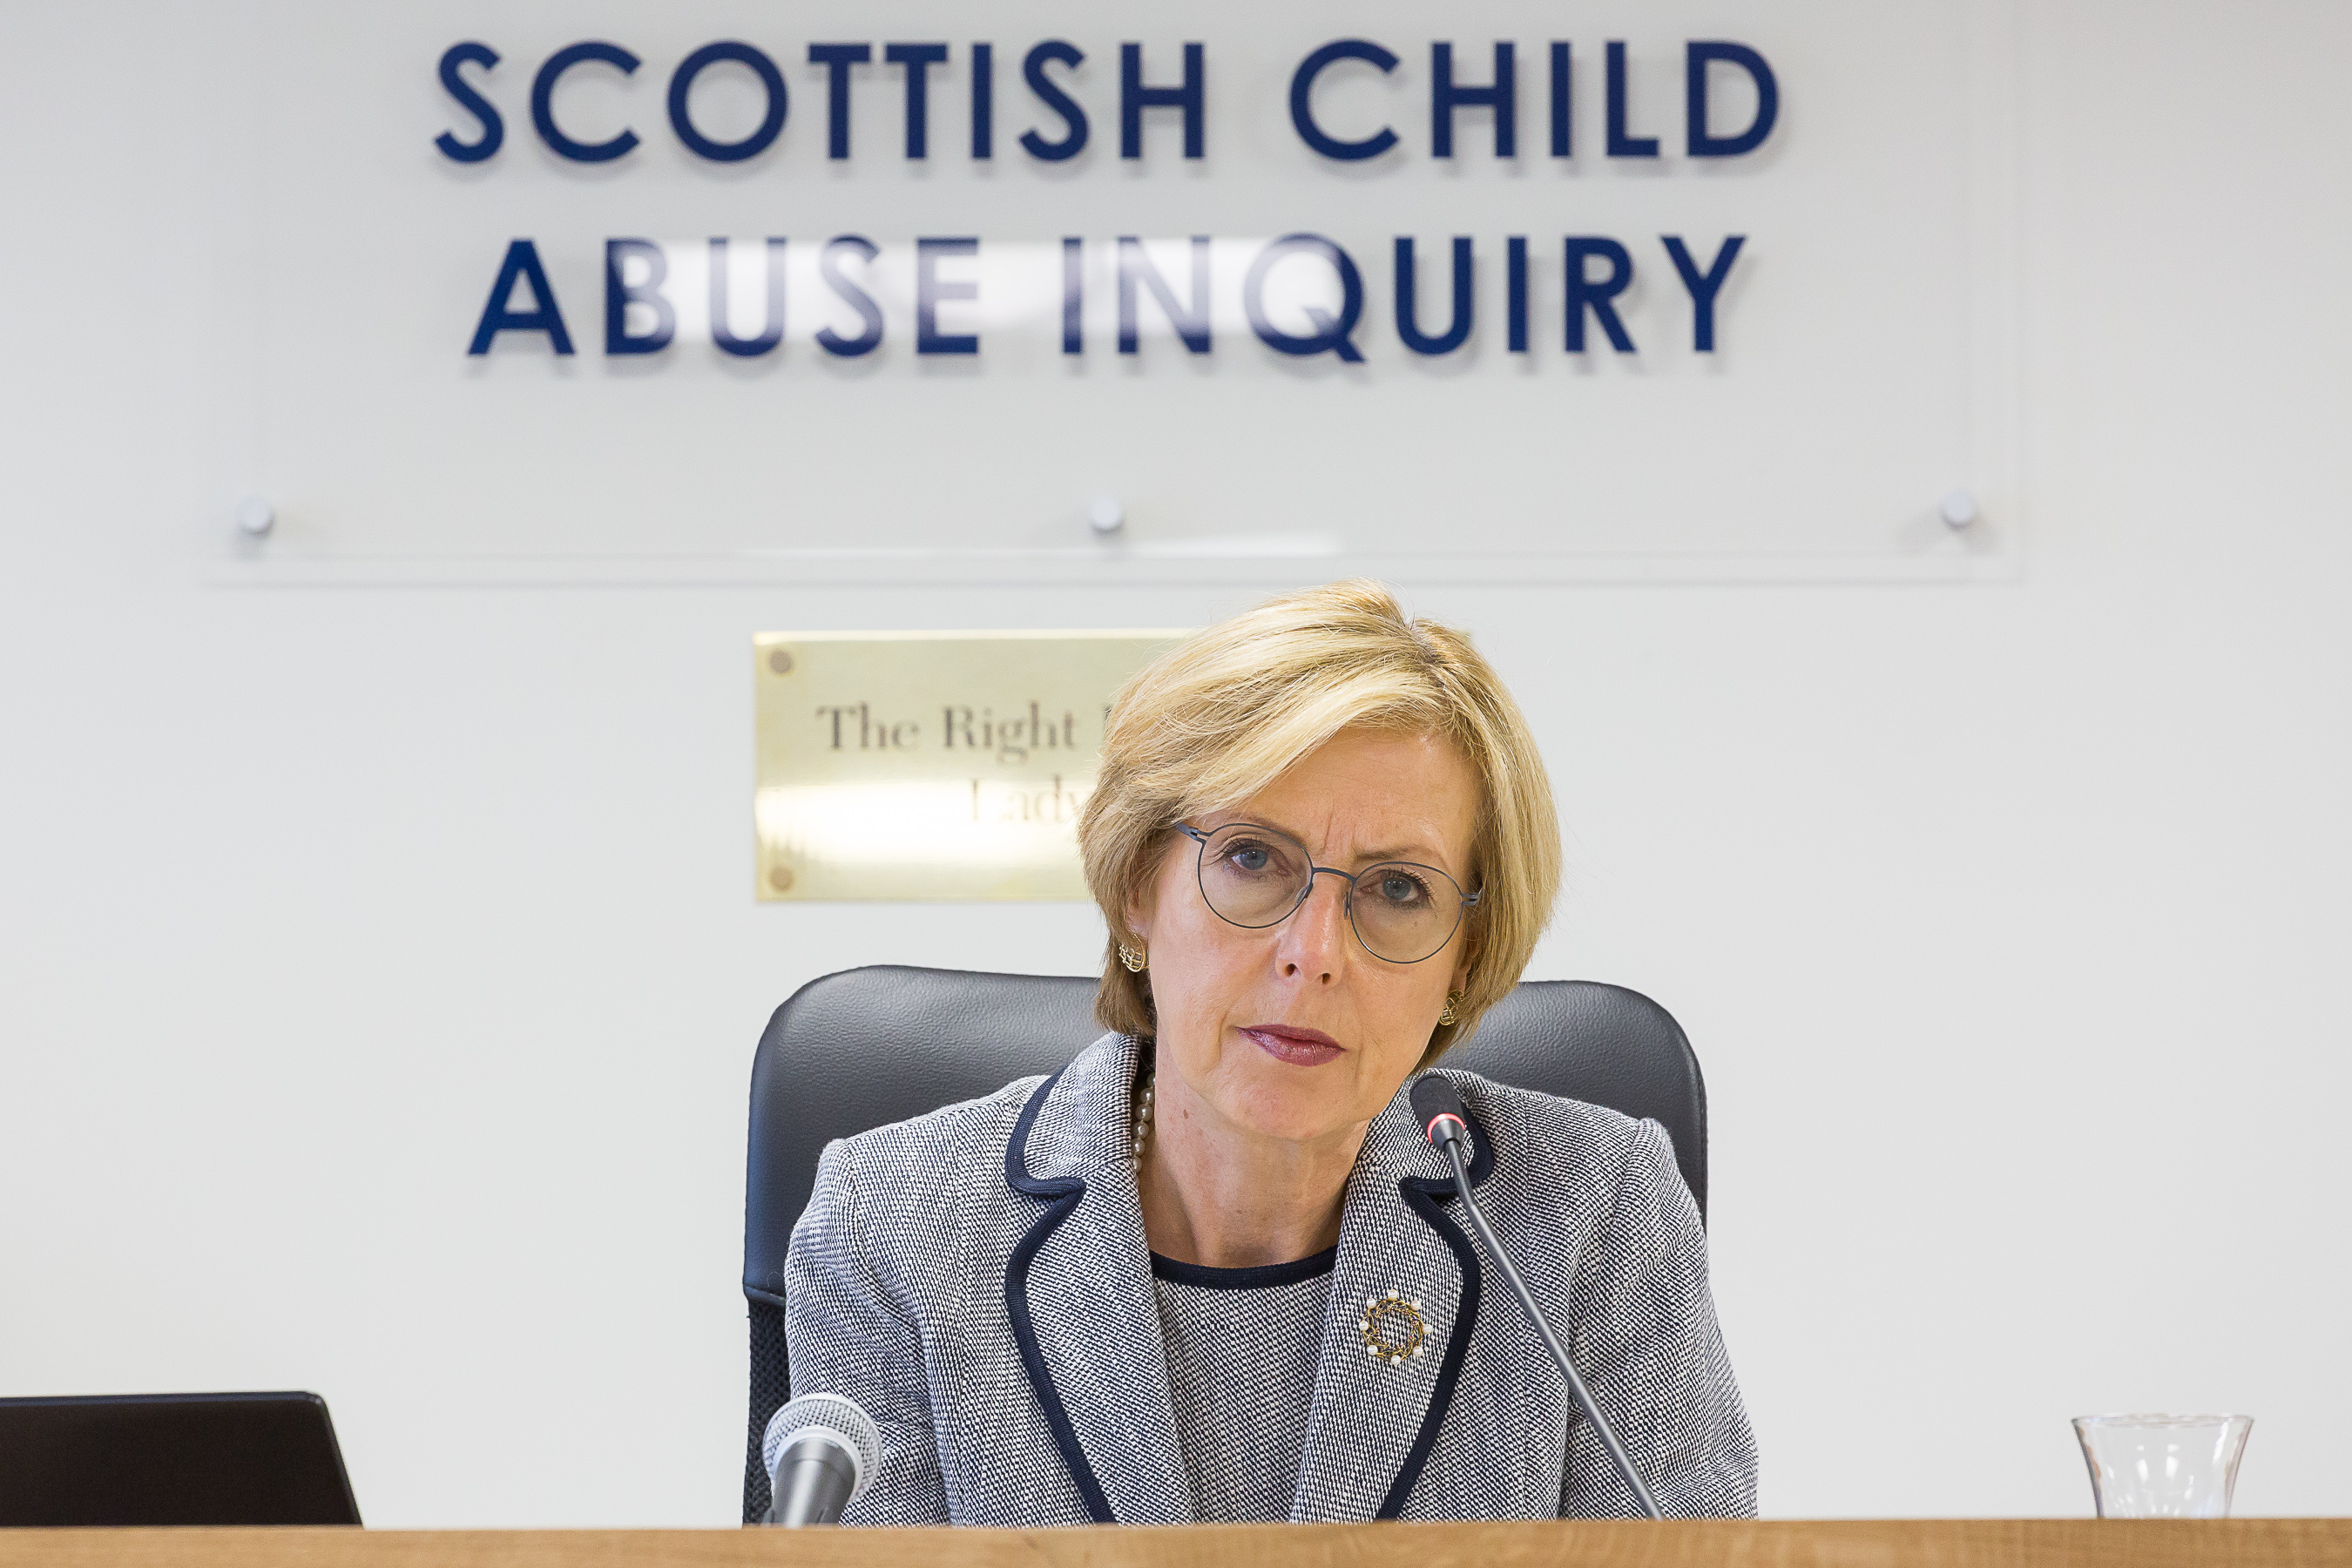 Lady Smith leading the Scottish Child Abuse Inquiry (Nick Mailer Photography)